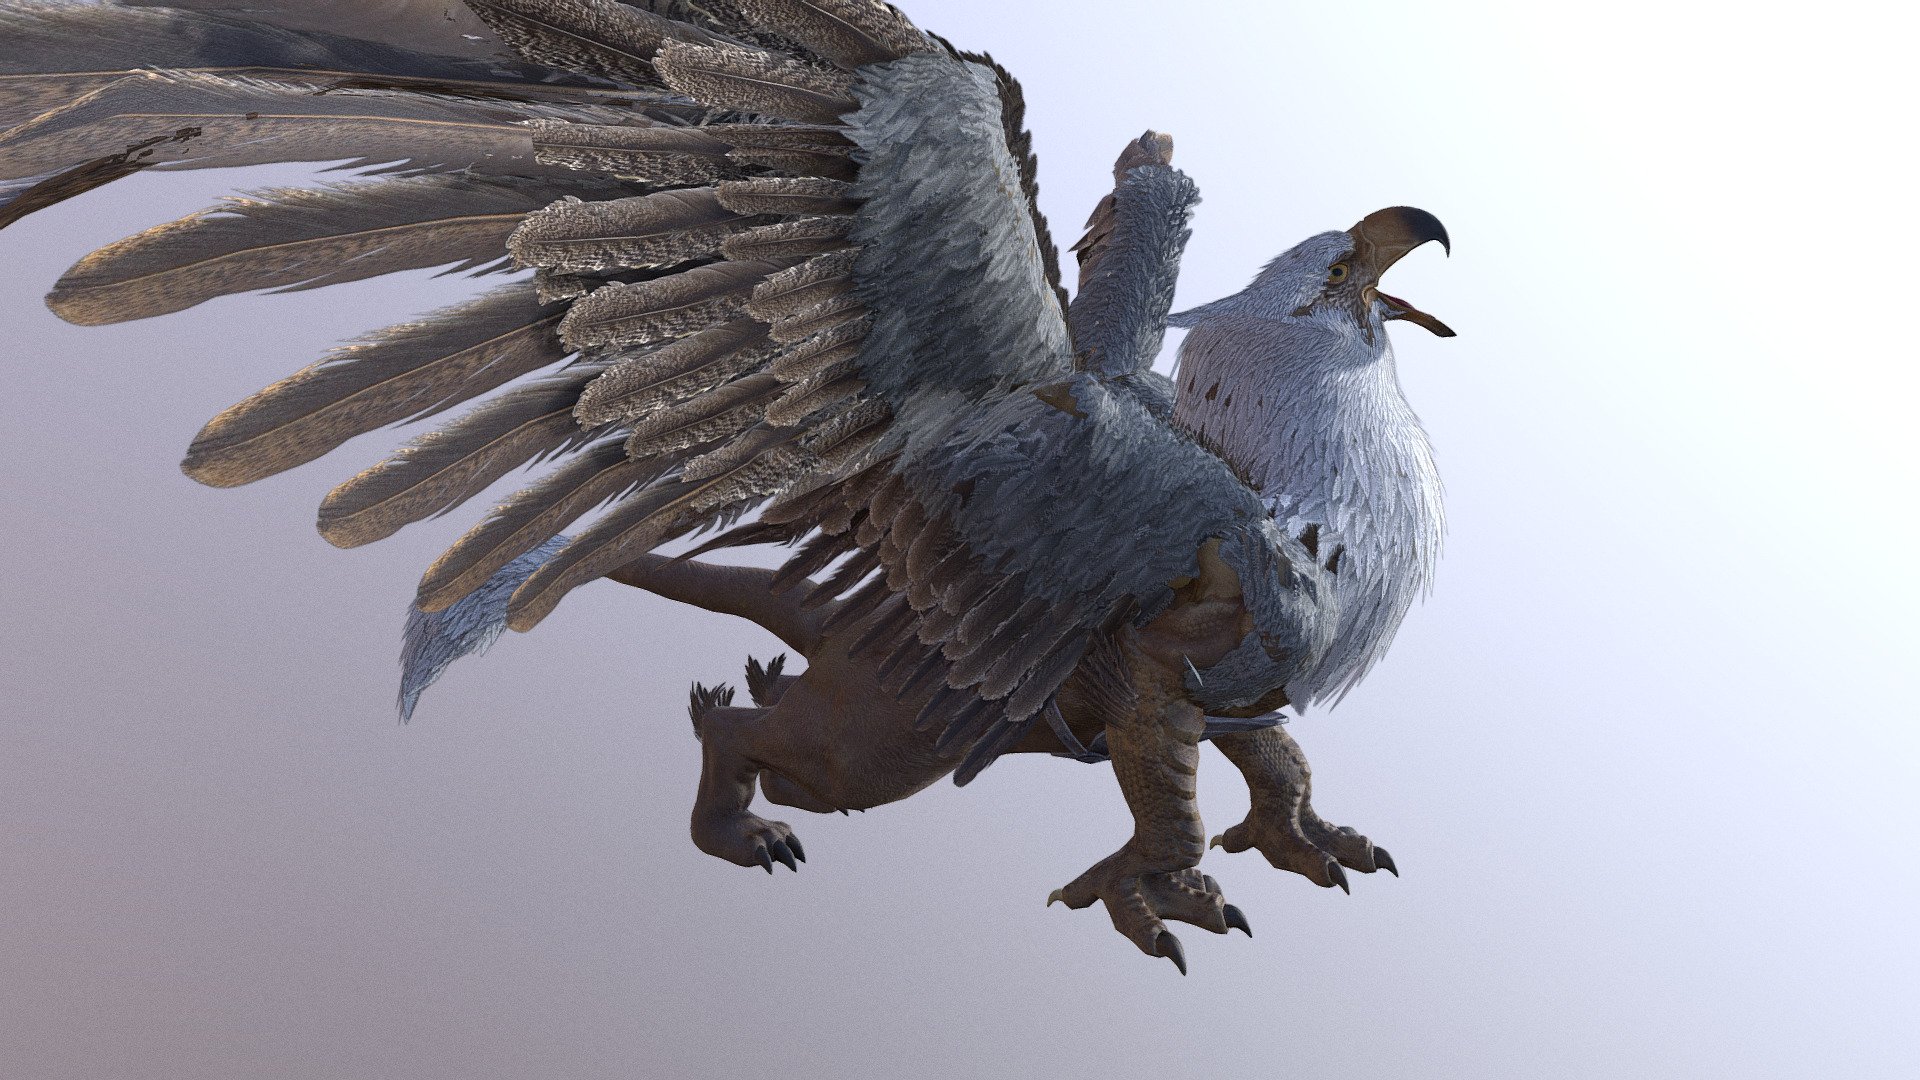 Griffin Roar Animated
fbx file format - Griffin Roar Animated - Buy Royalty Free 3D model by monstermod 3d model